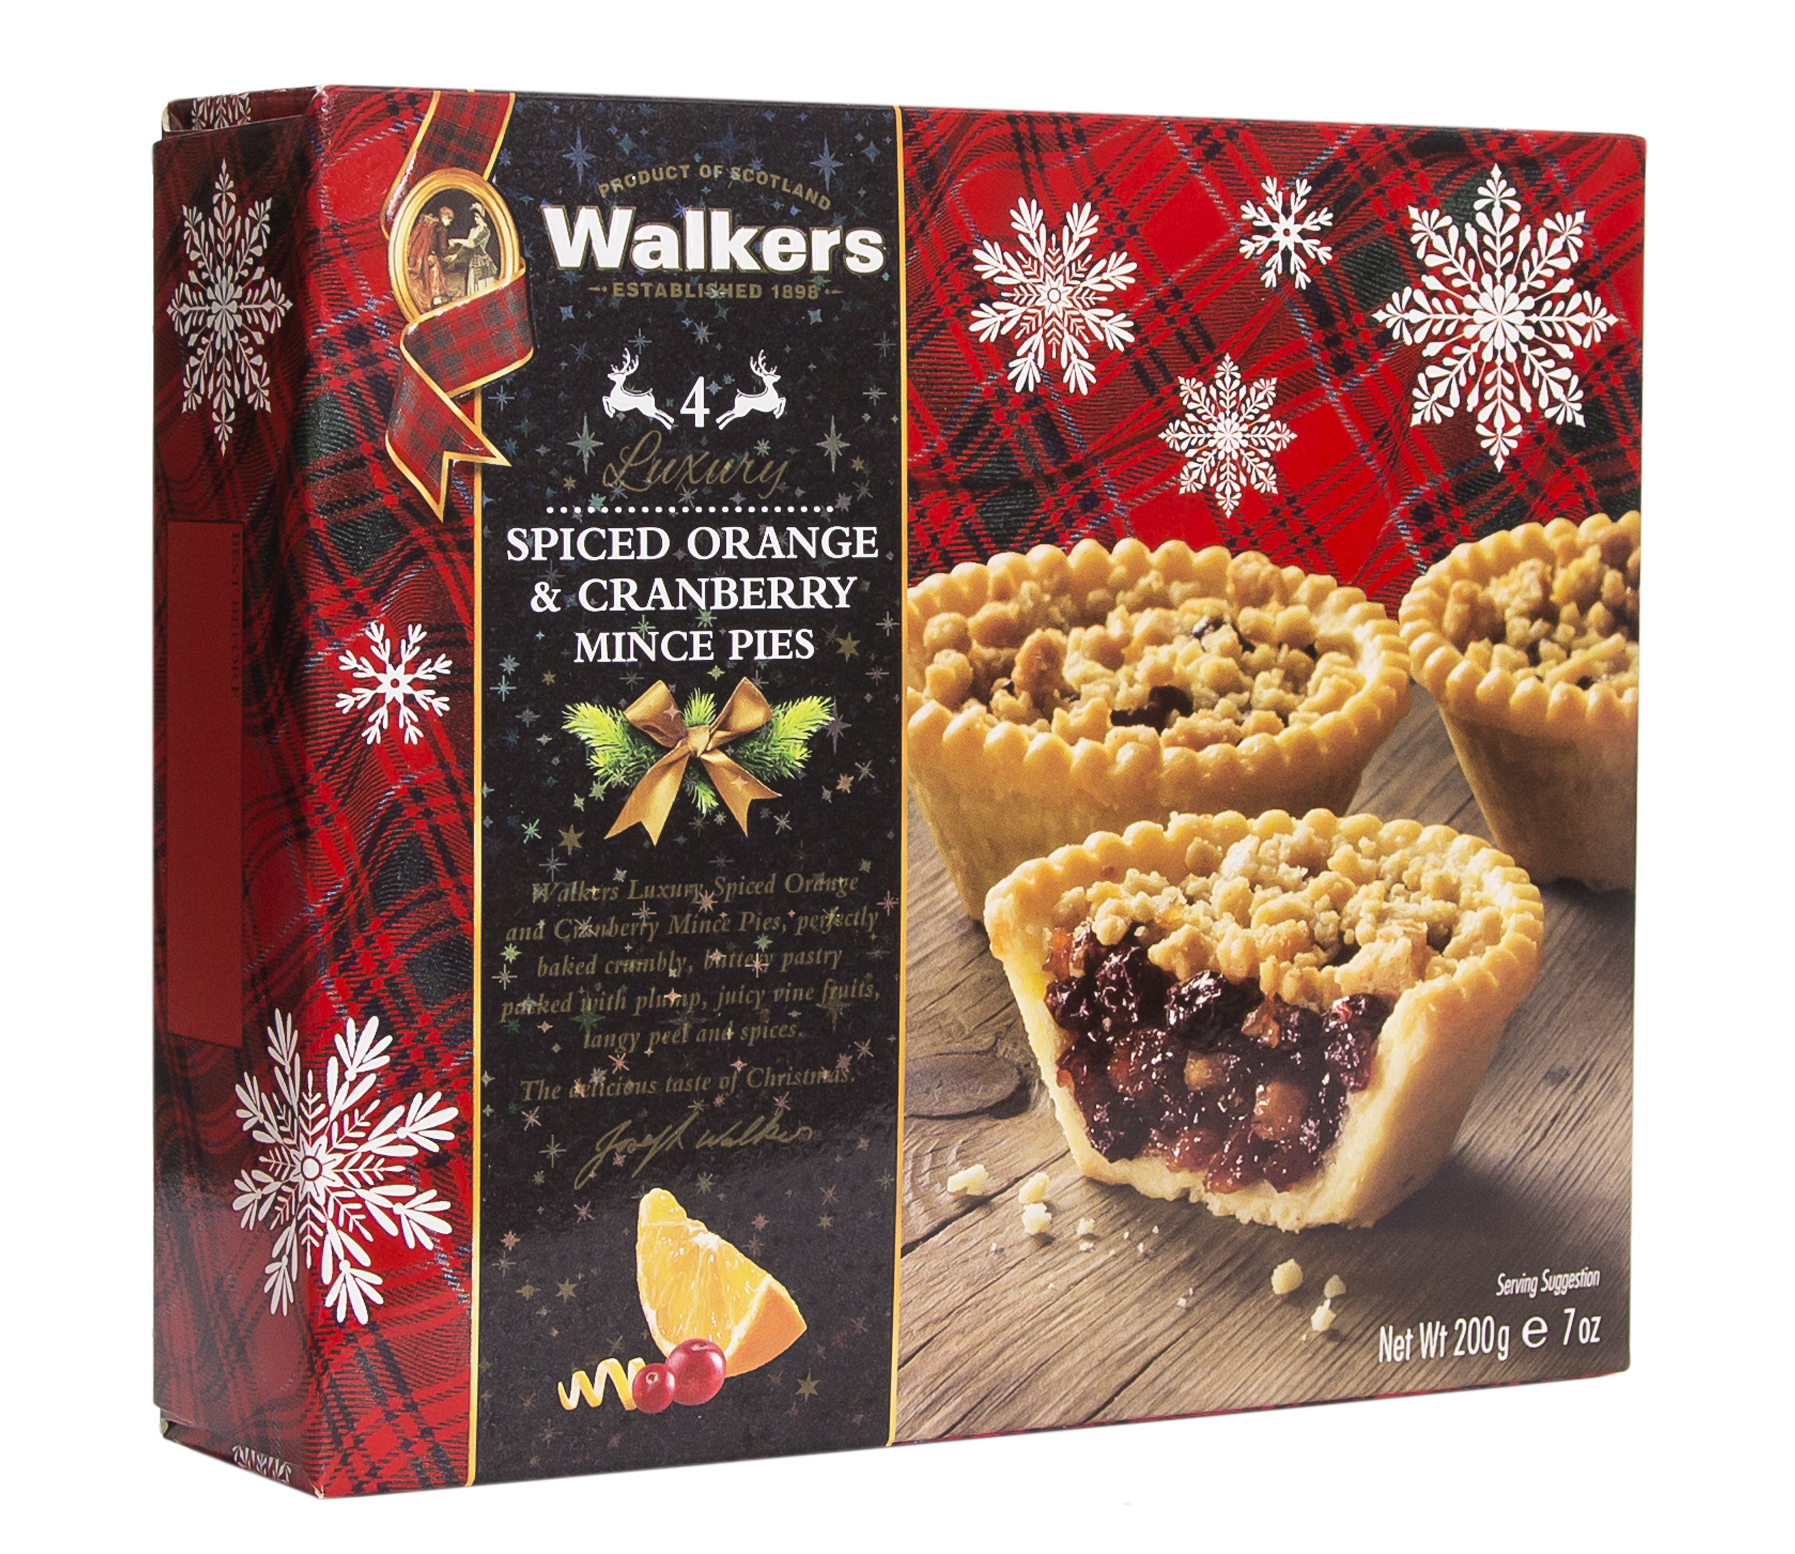 Walkers carton of orange and cranberry mince pies